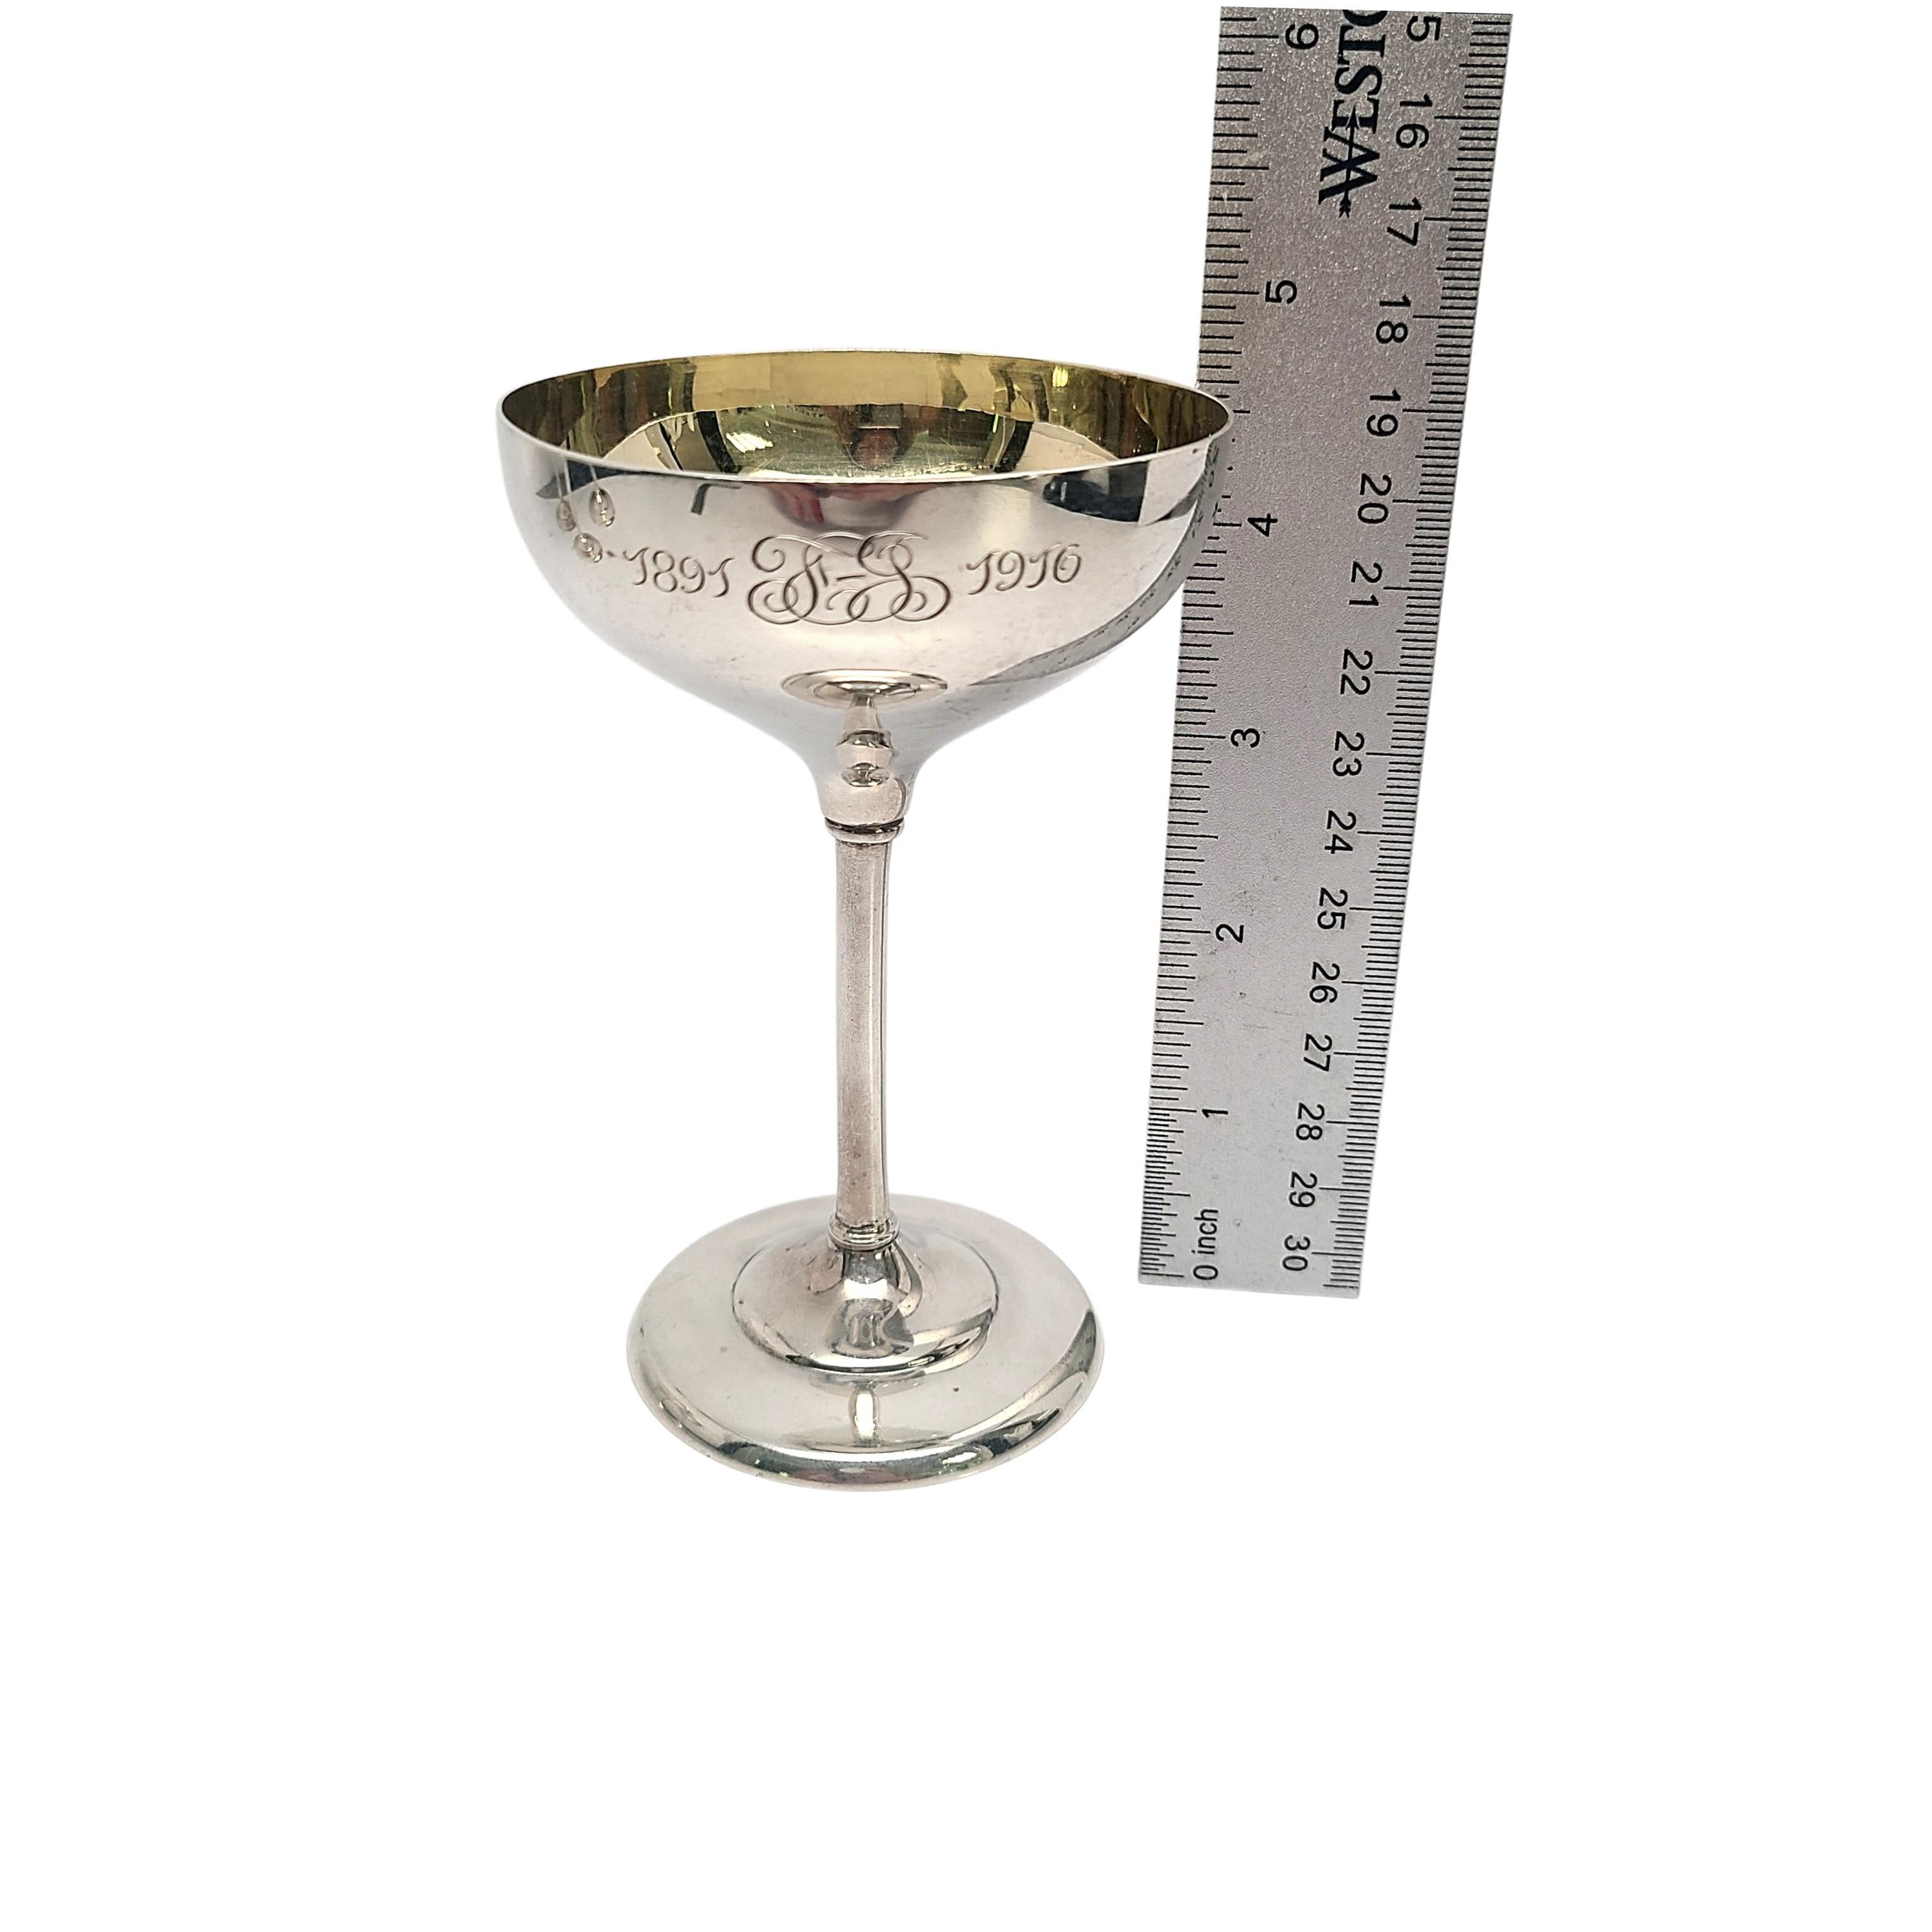 Set of 4 Barbour Silver Co Champagne/Cocktail Goblet with Engraving For Sale 3